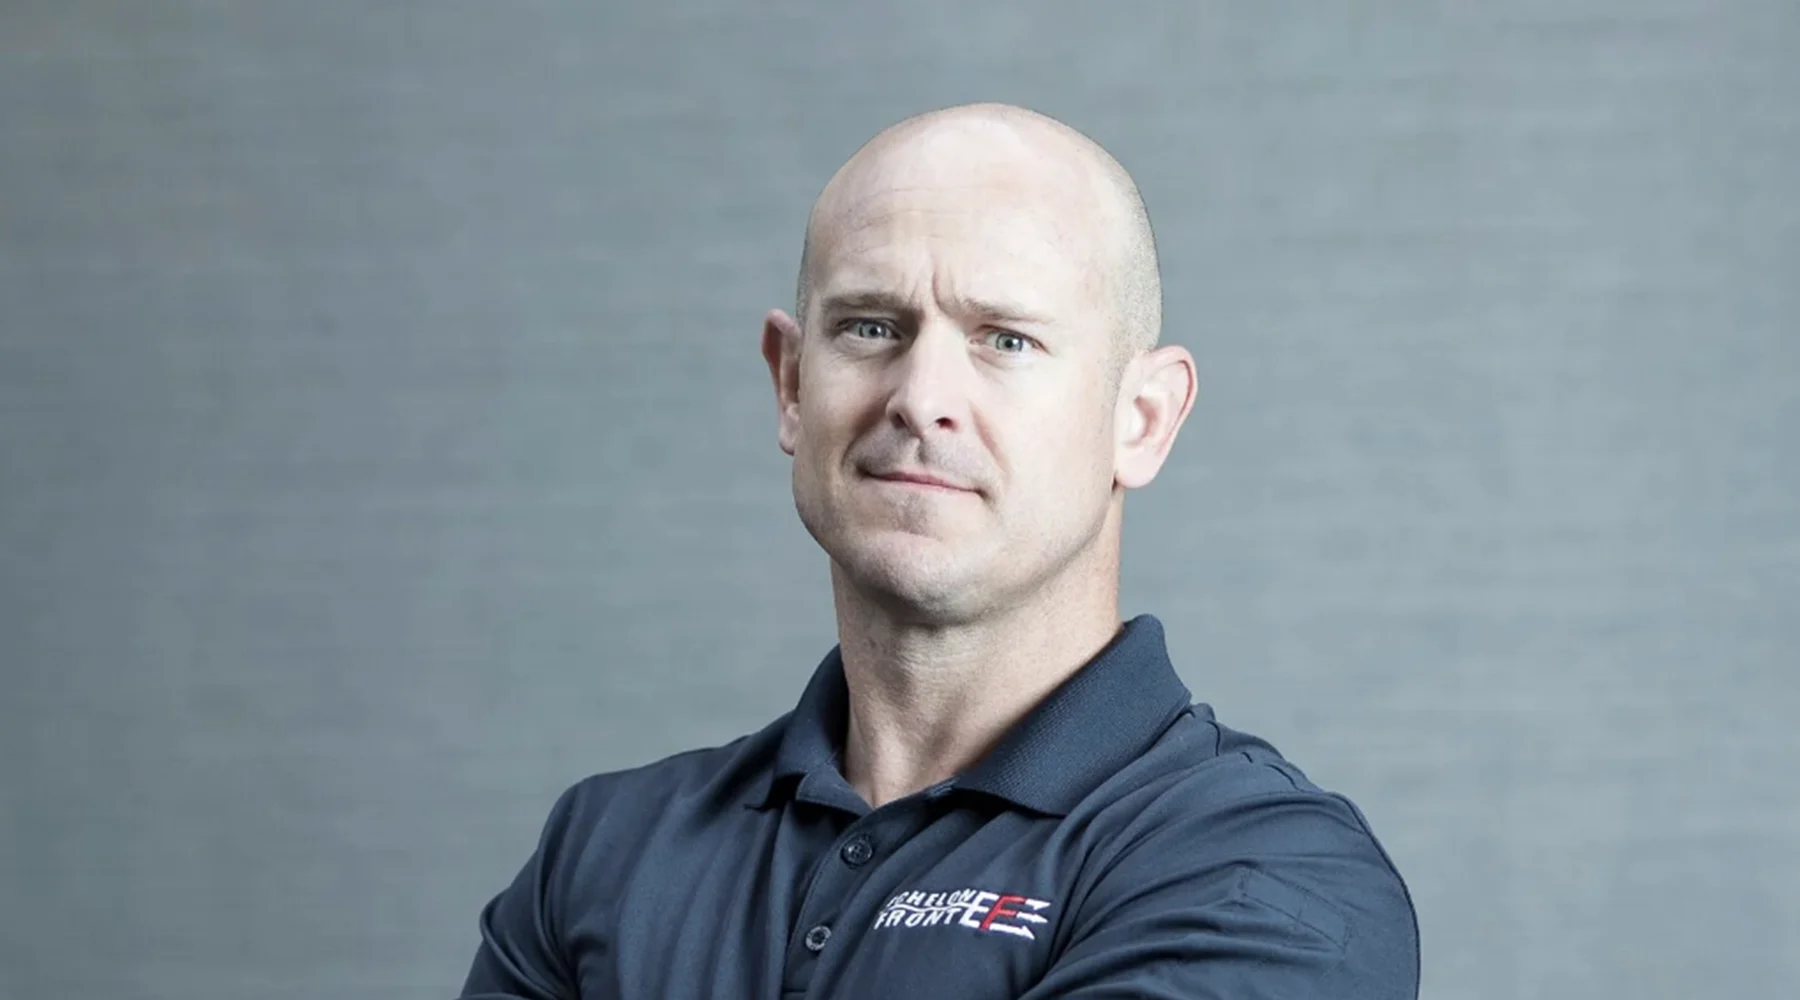 Podcast 223: From U.S. Navy Seal to World Record Holder with Mike Sarraille